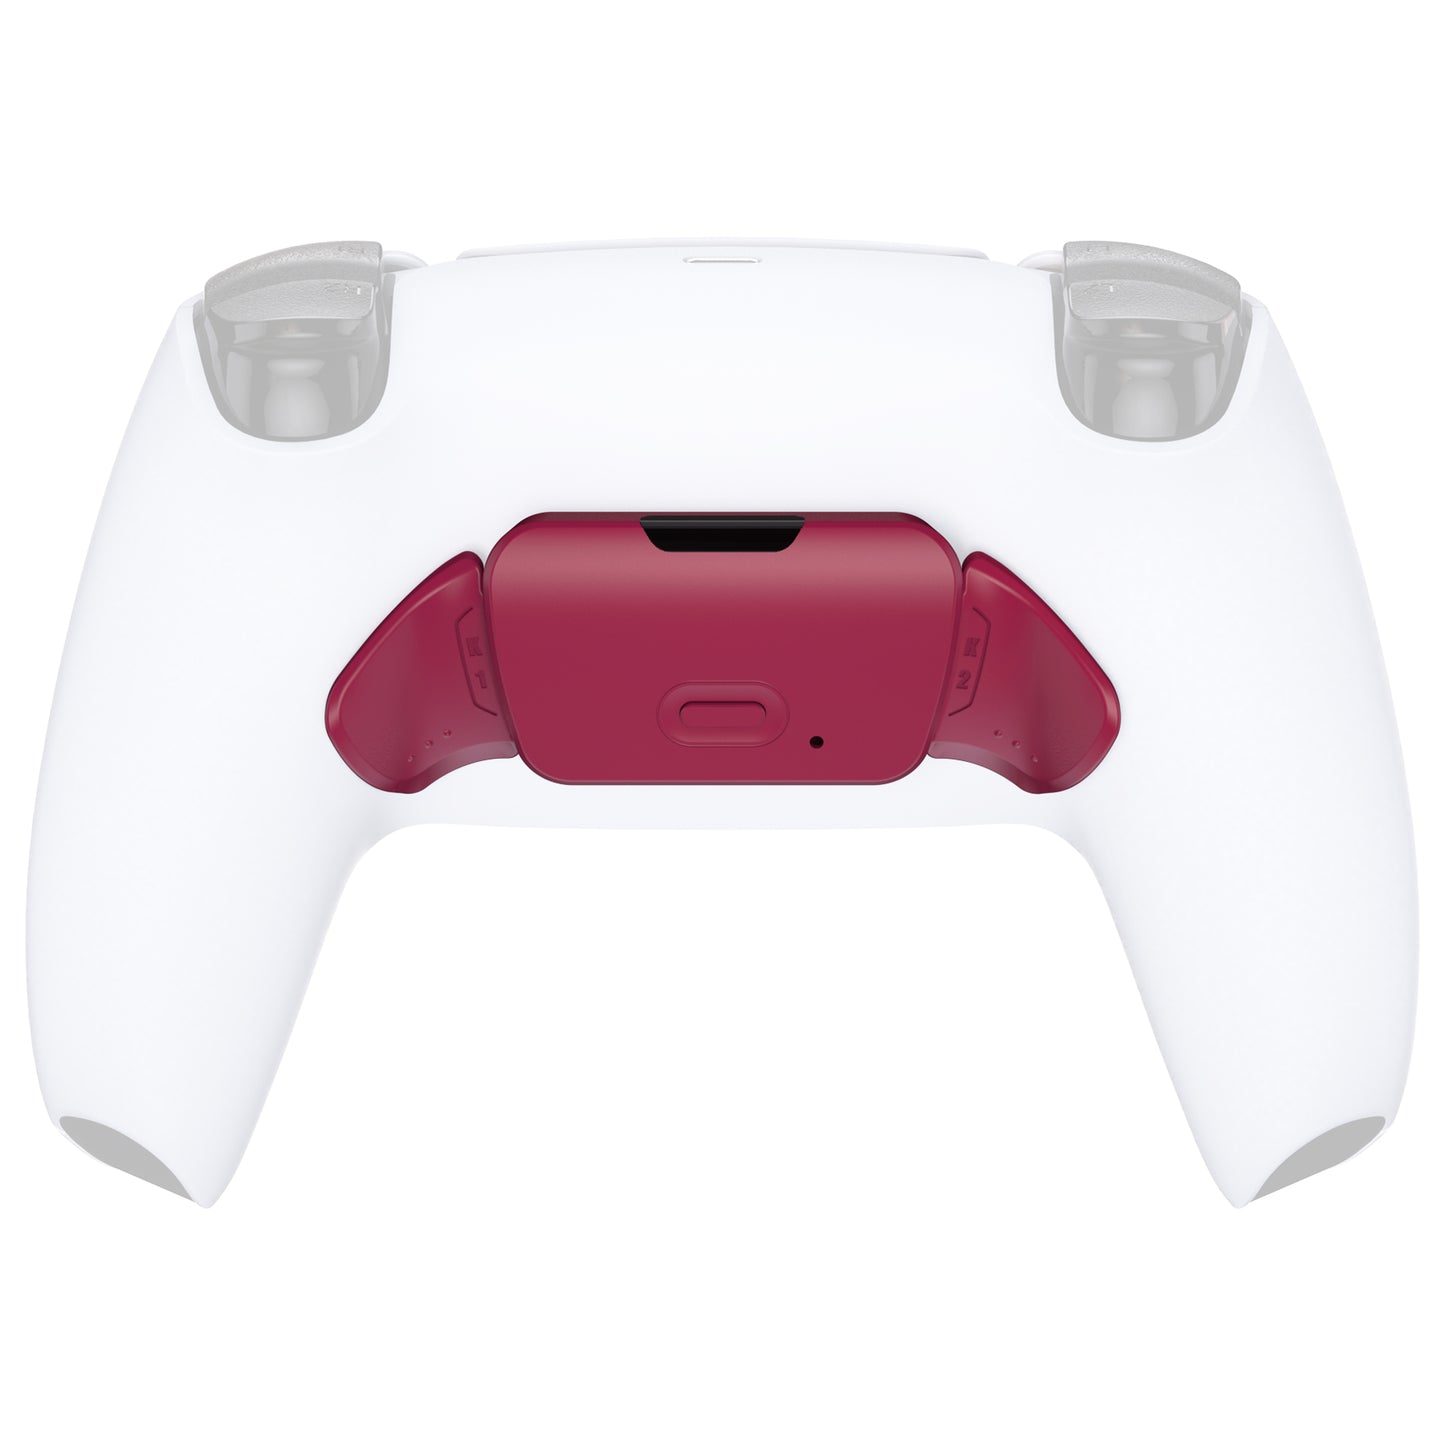 eXtremeRate Retail Cosmic Red Replacement Redesigned K1 K2 Back Button Housing Shell for ps5 Controller eXtremerate RISE Remap Kit - Controller & RISE Remap Board NOT Included - WPFM5008